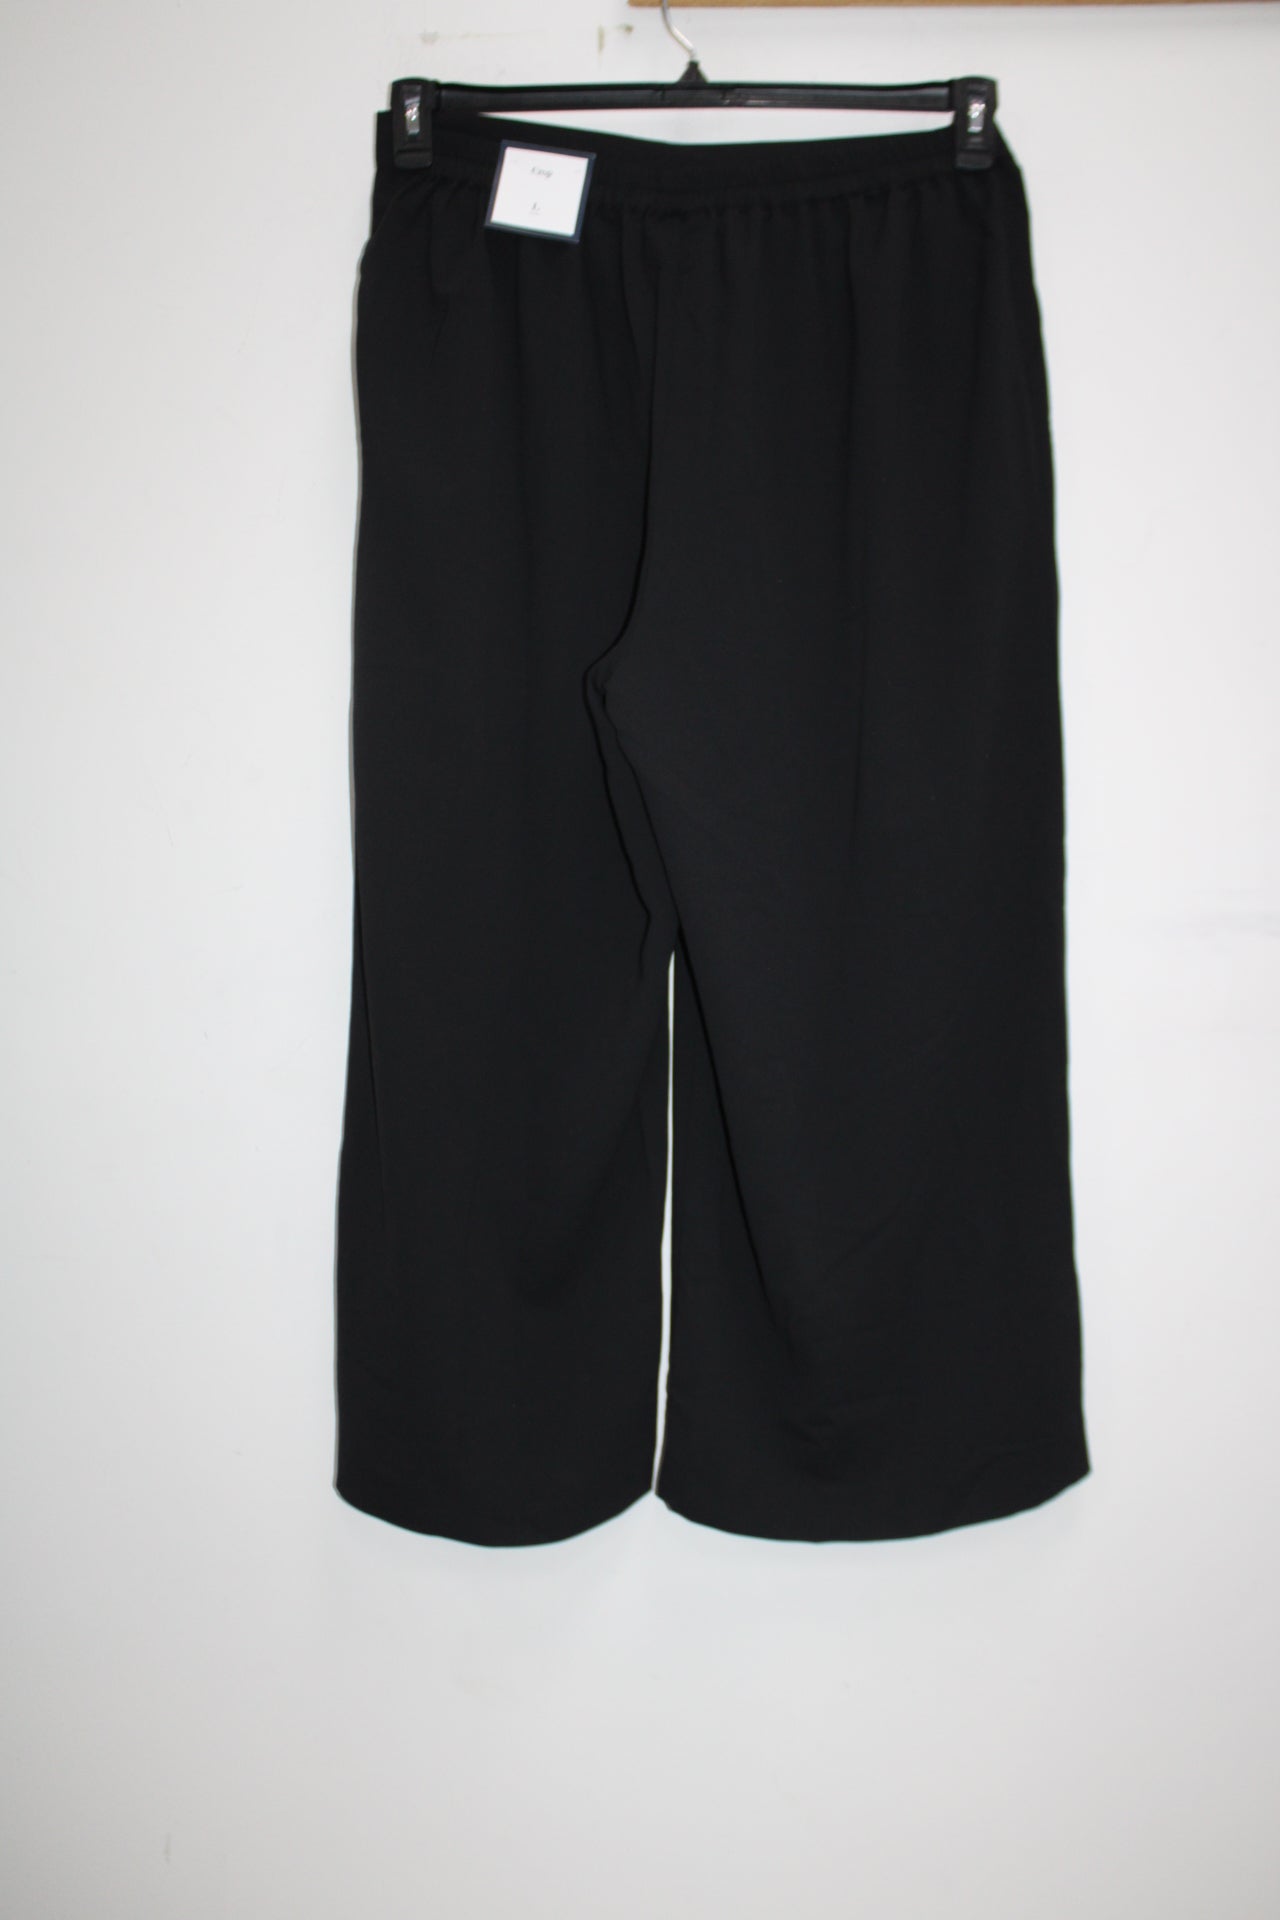 Charter Club Buttom Solid Soft Pant Black Large